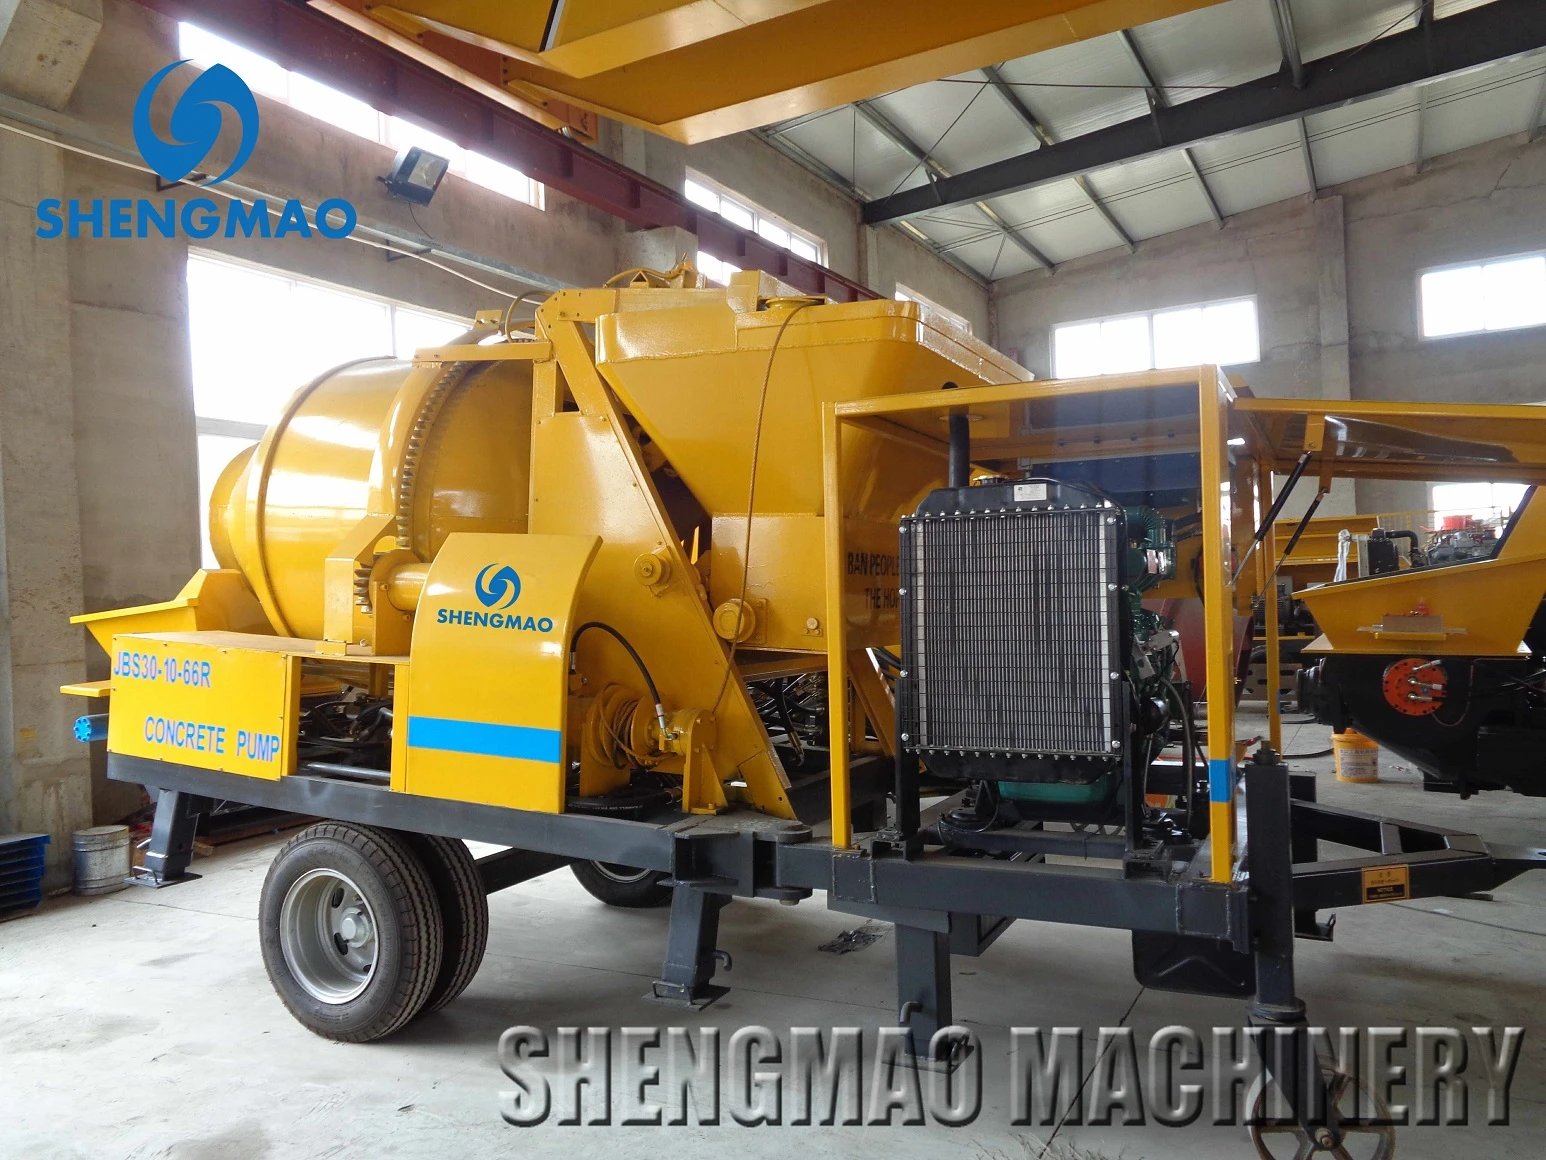 Mobile Mini Concrete Mixer with Pump for Sale Agent wanted for Middle East and Africa Markets